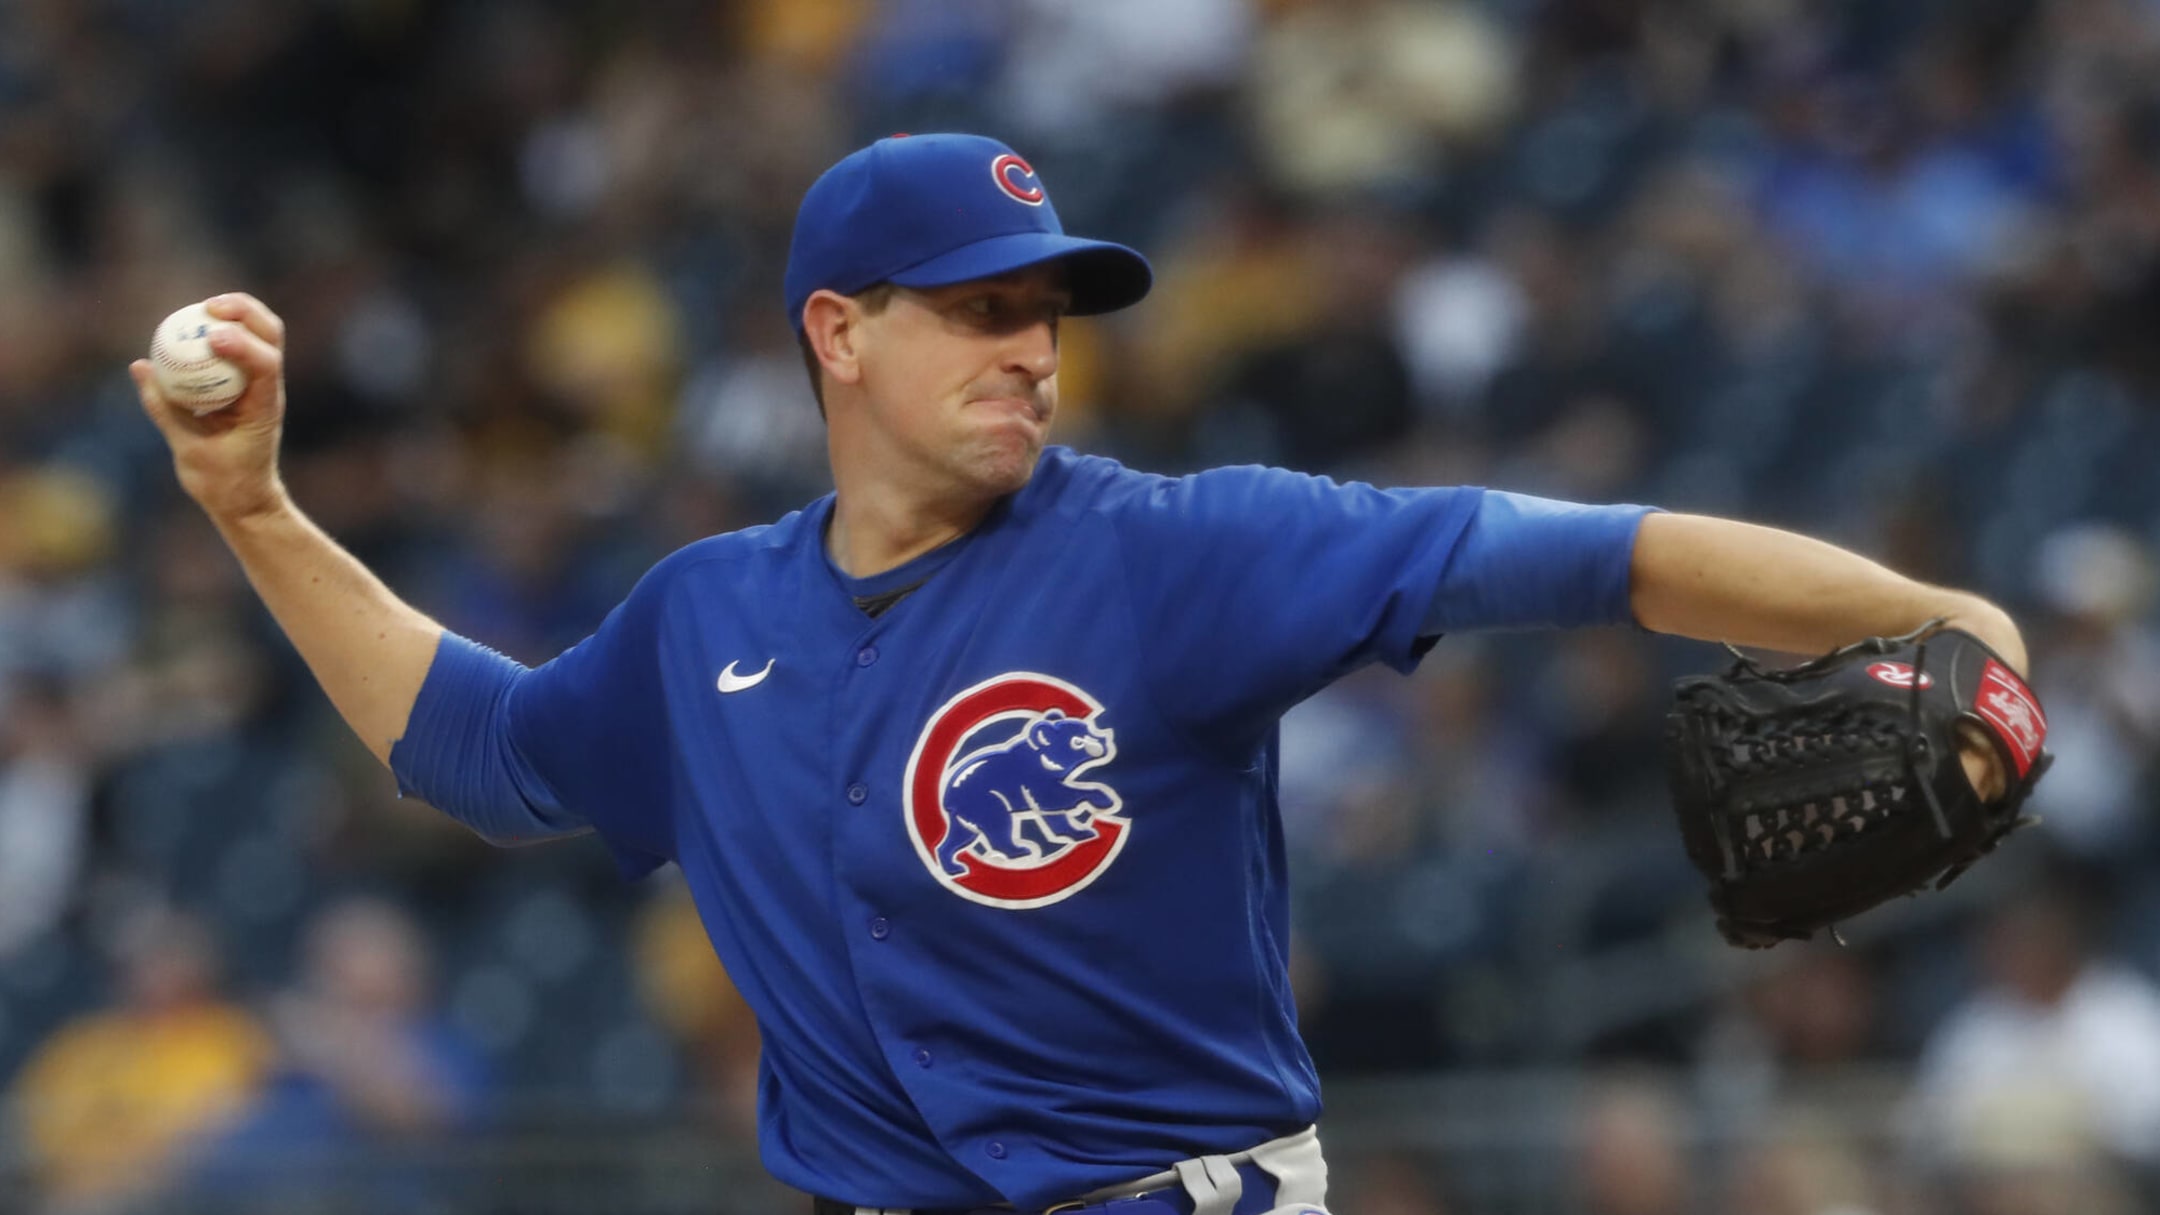 Pitcher Kyle Hendricks on Cubs' offseason additions: We brought in